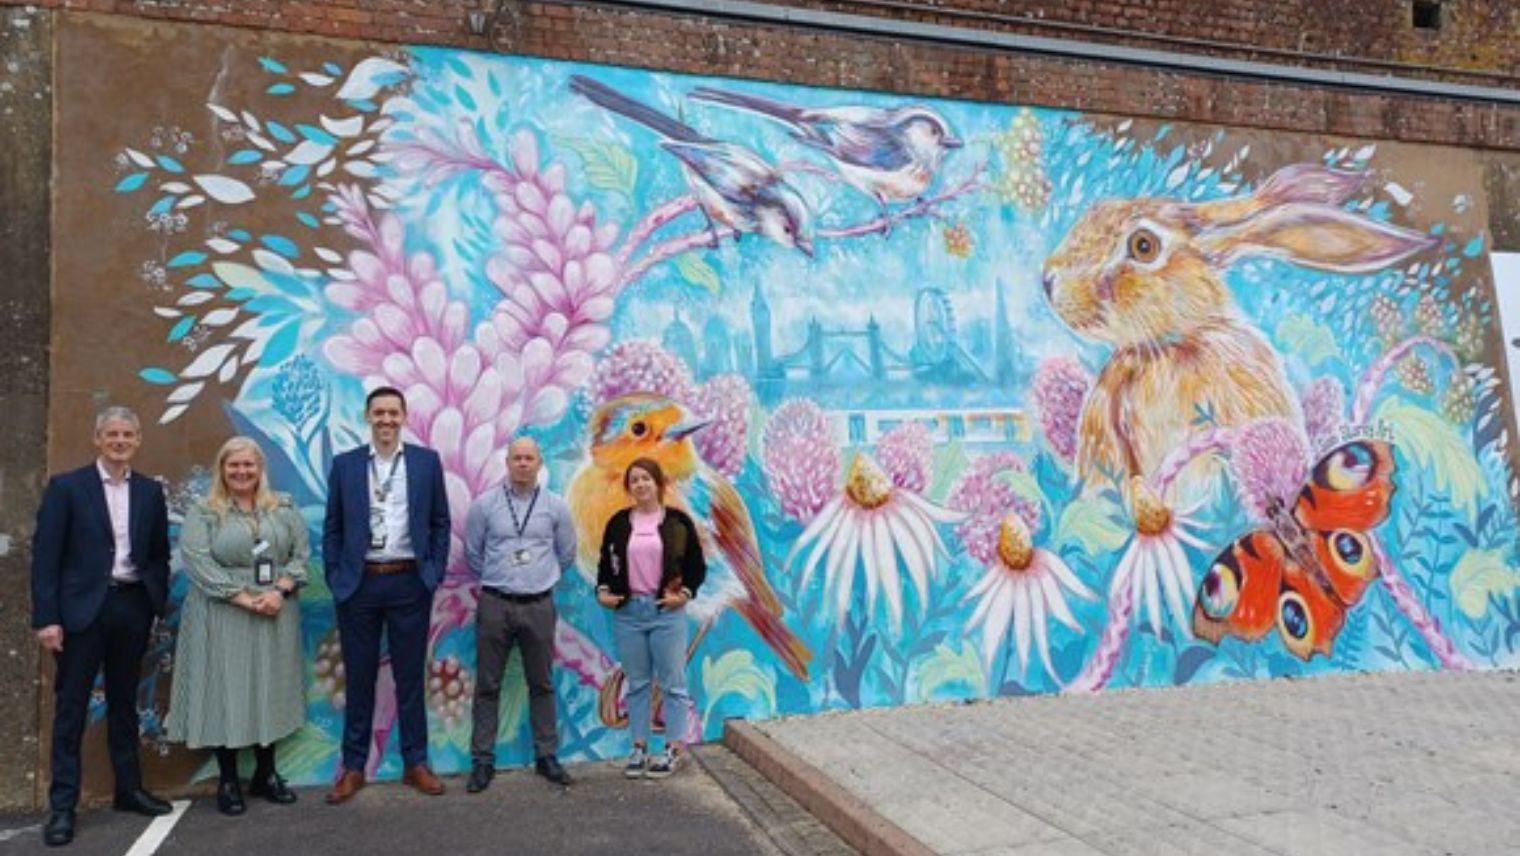 Sian Storey and south Western Railway employees by the new mural at Basingstoke station